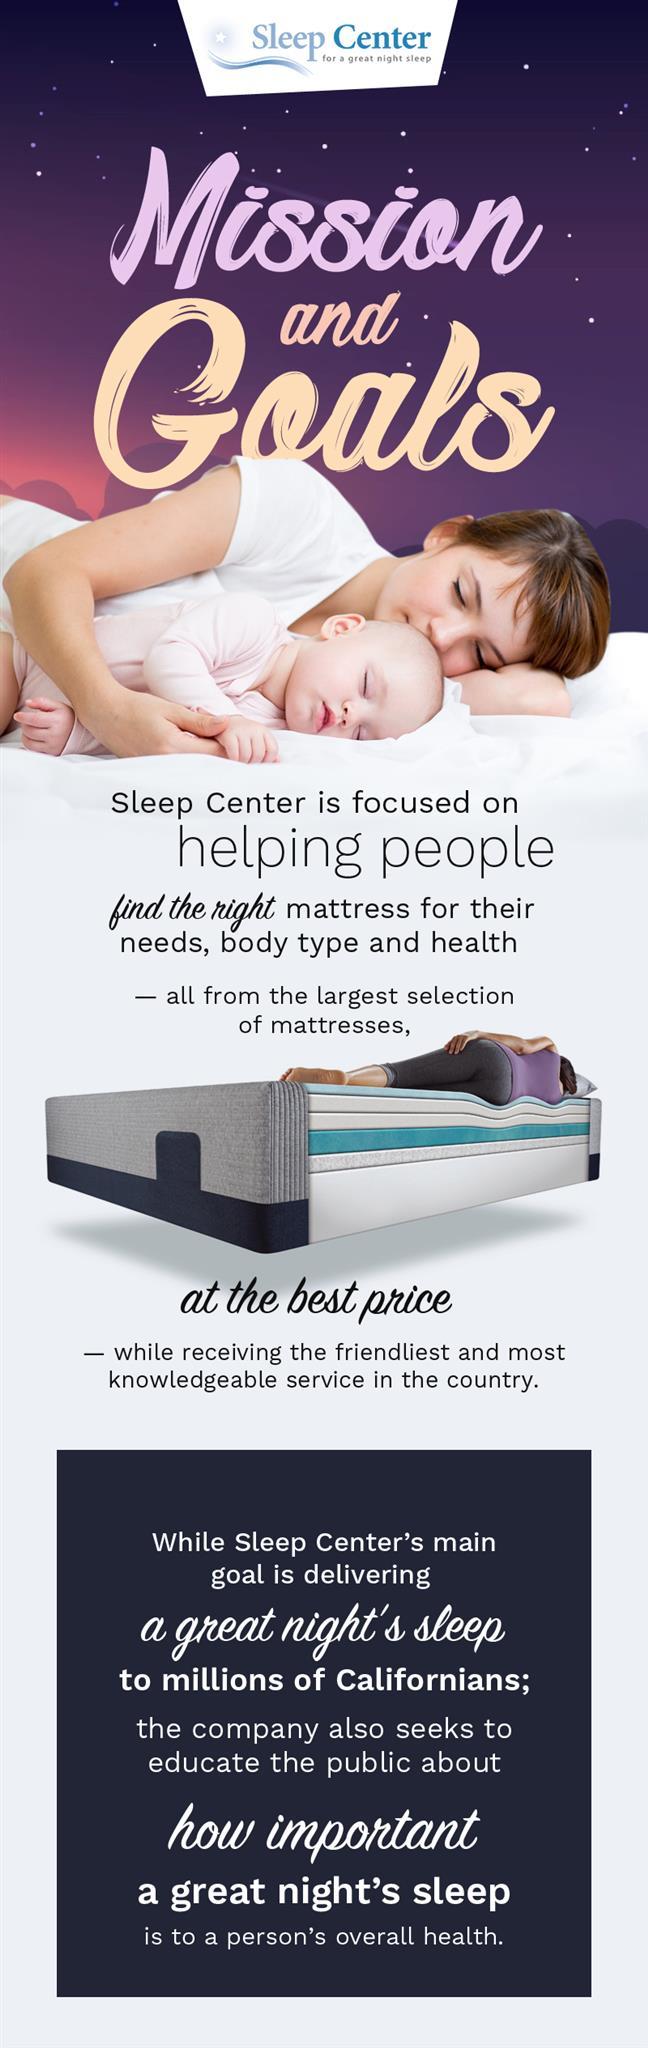 Shop Finest Quality Furniture and Mattresses Online with Sleep Center